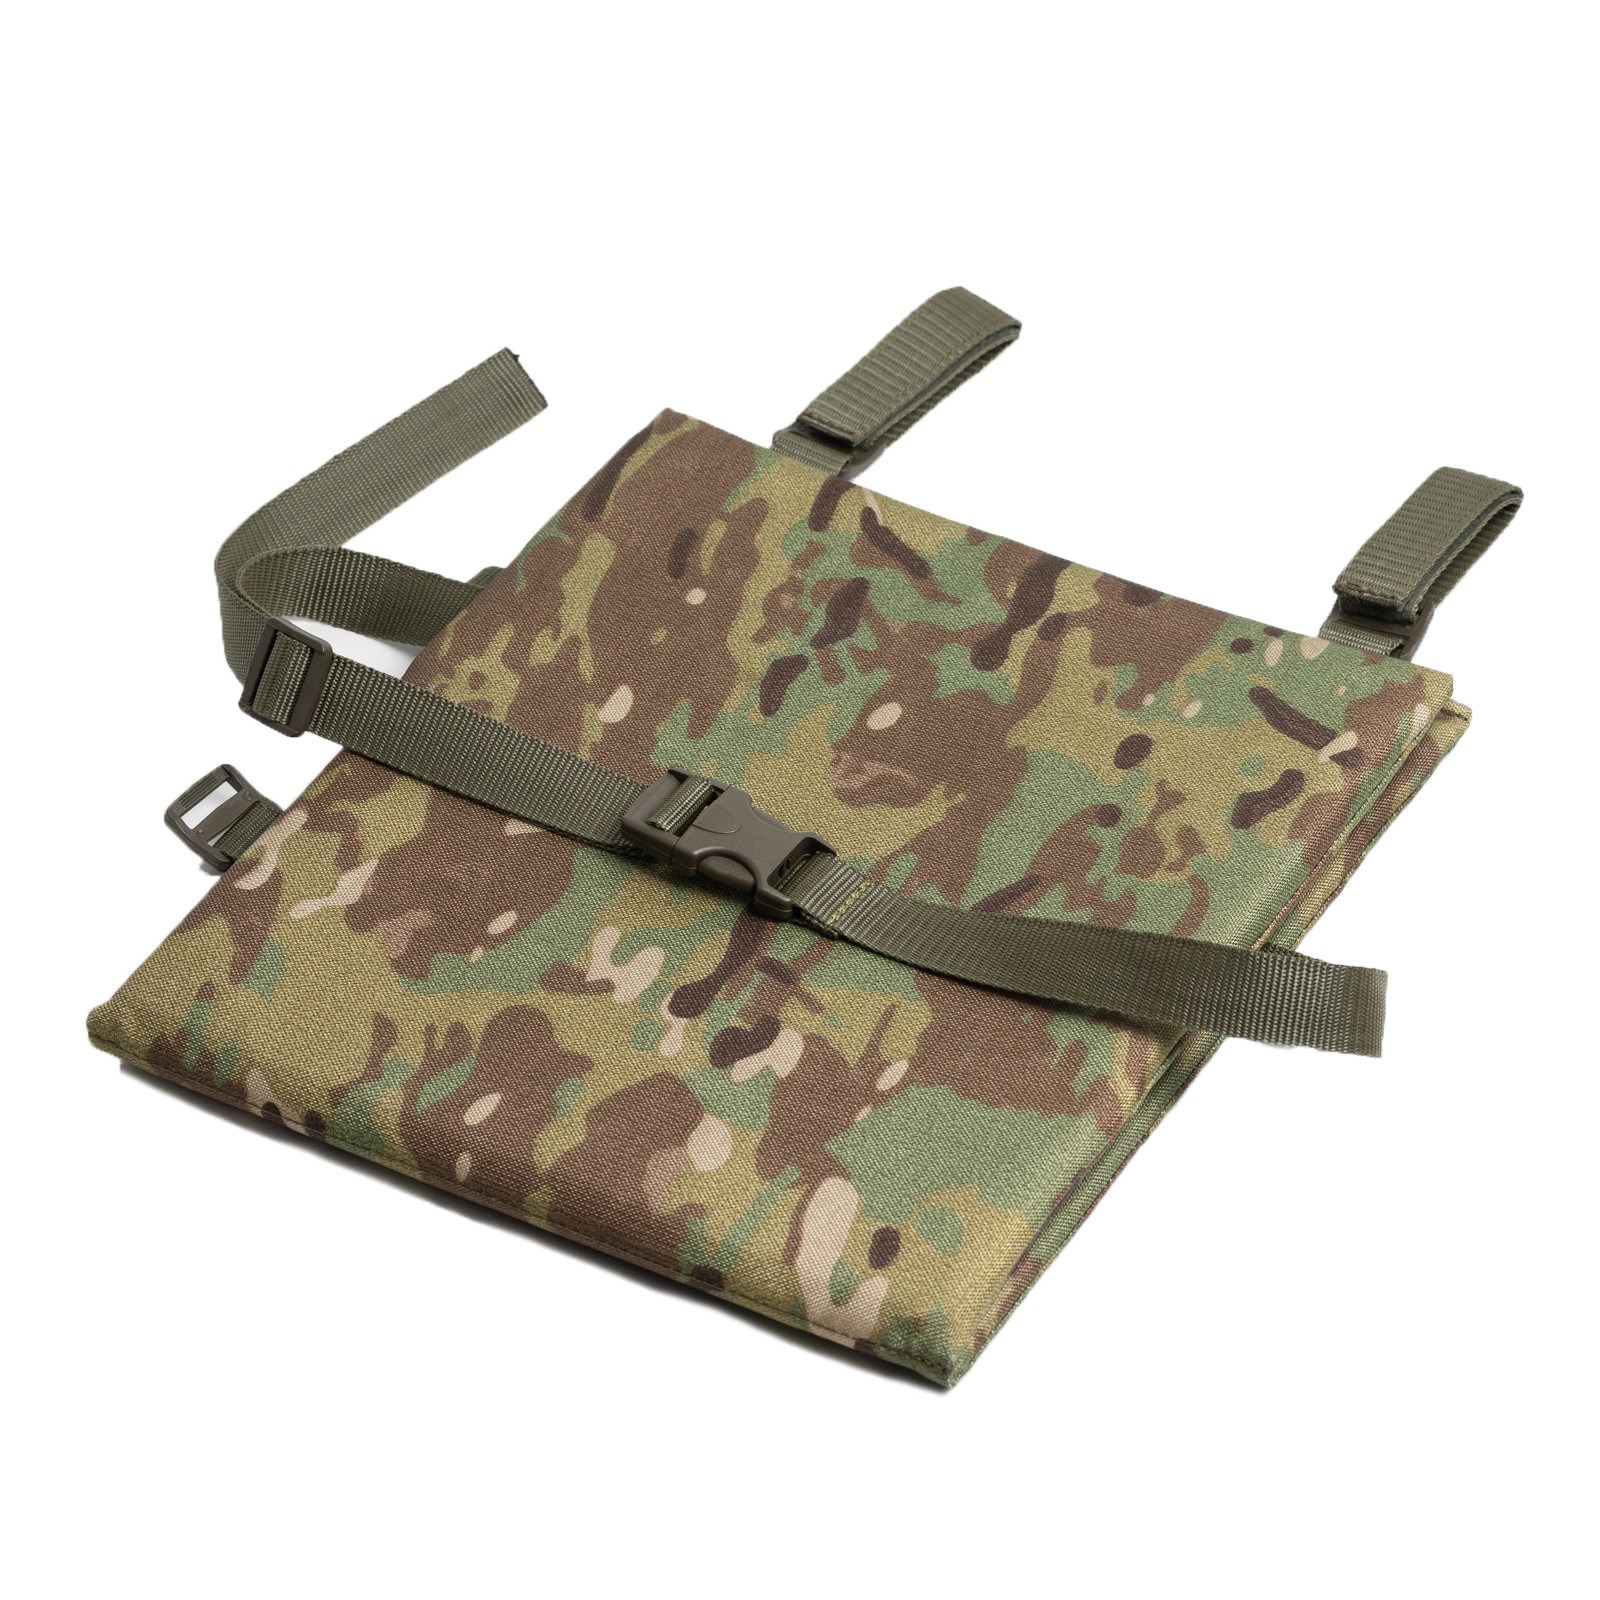 double seat pad, molle system multicam seating pad, tactiical grounsheet